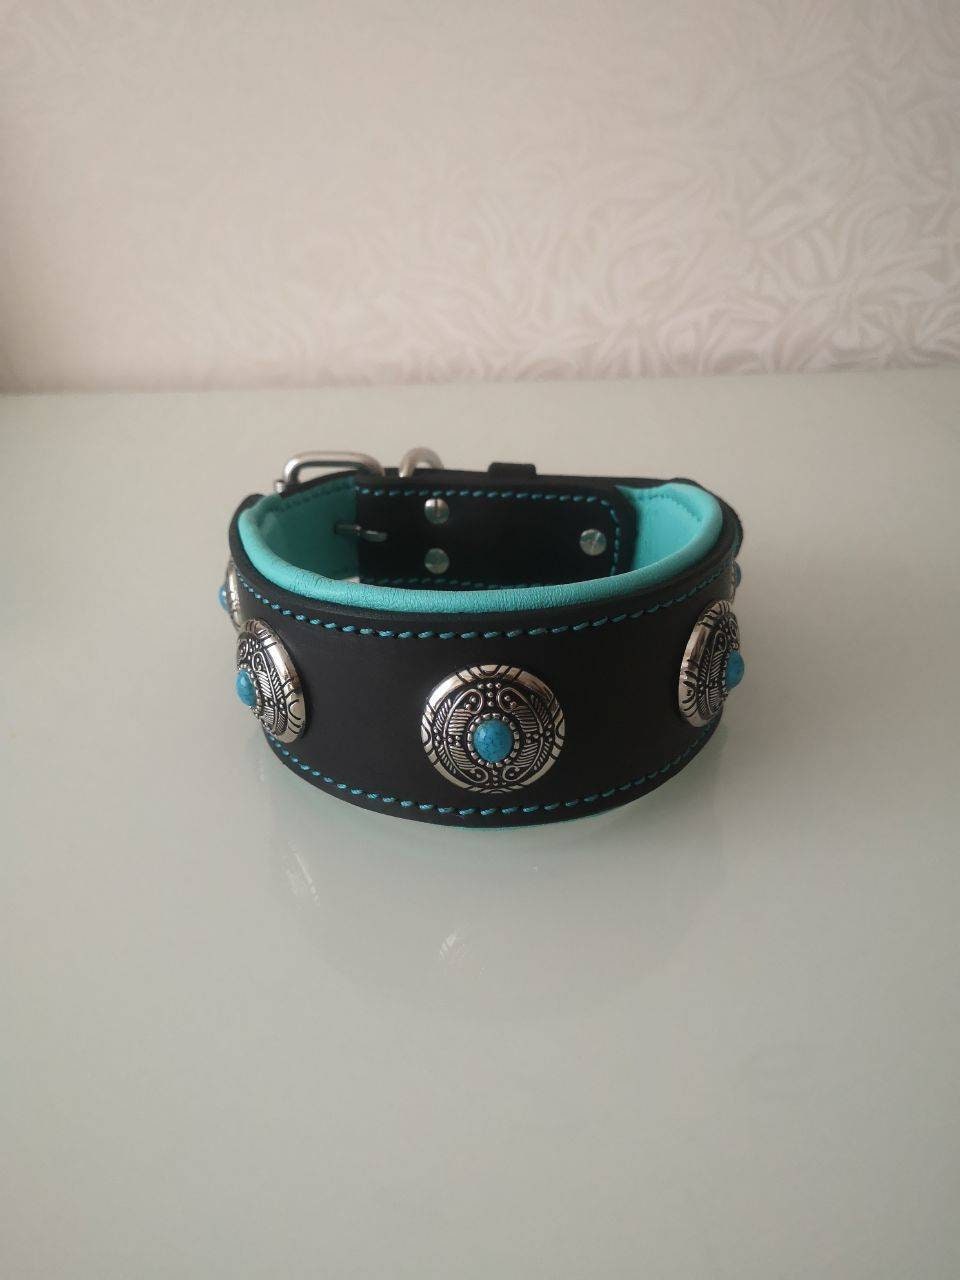 Mint Leather Dog Collar, 2 in padded collar for big dog, Luxury Leather Dog Collar, Turquoise Flower Decor Leather Collar, Custom Dog collar